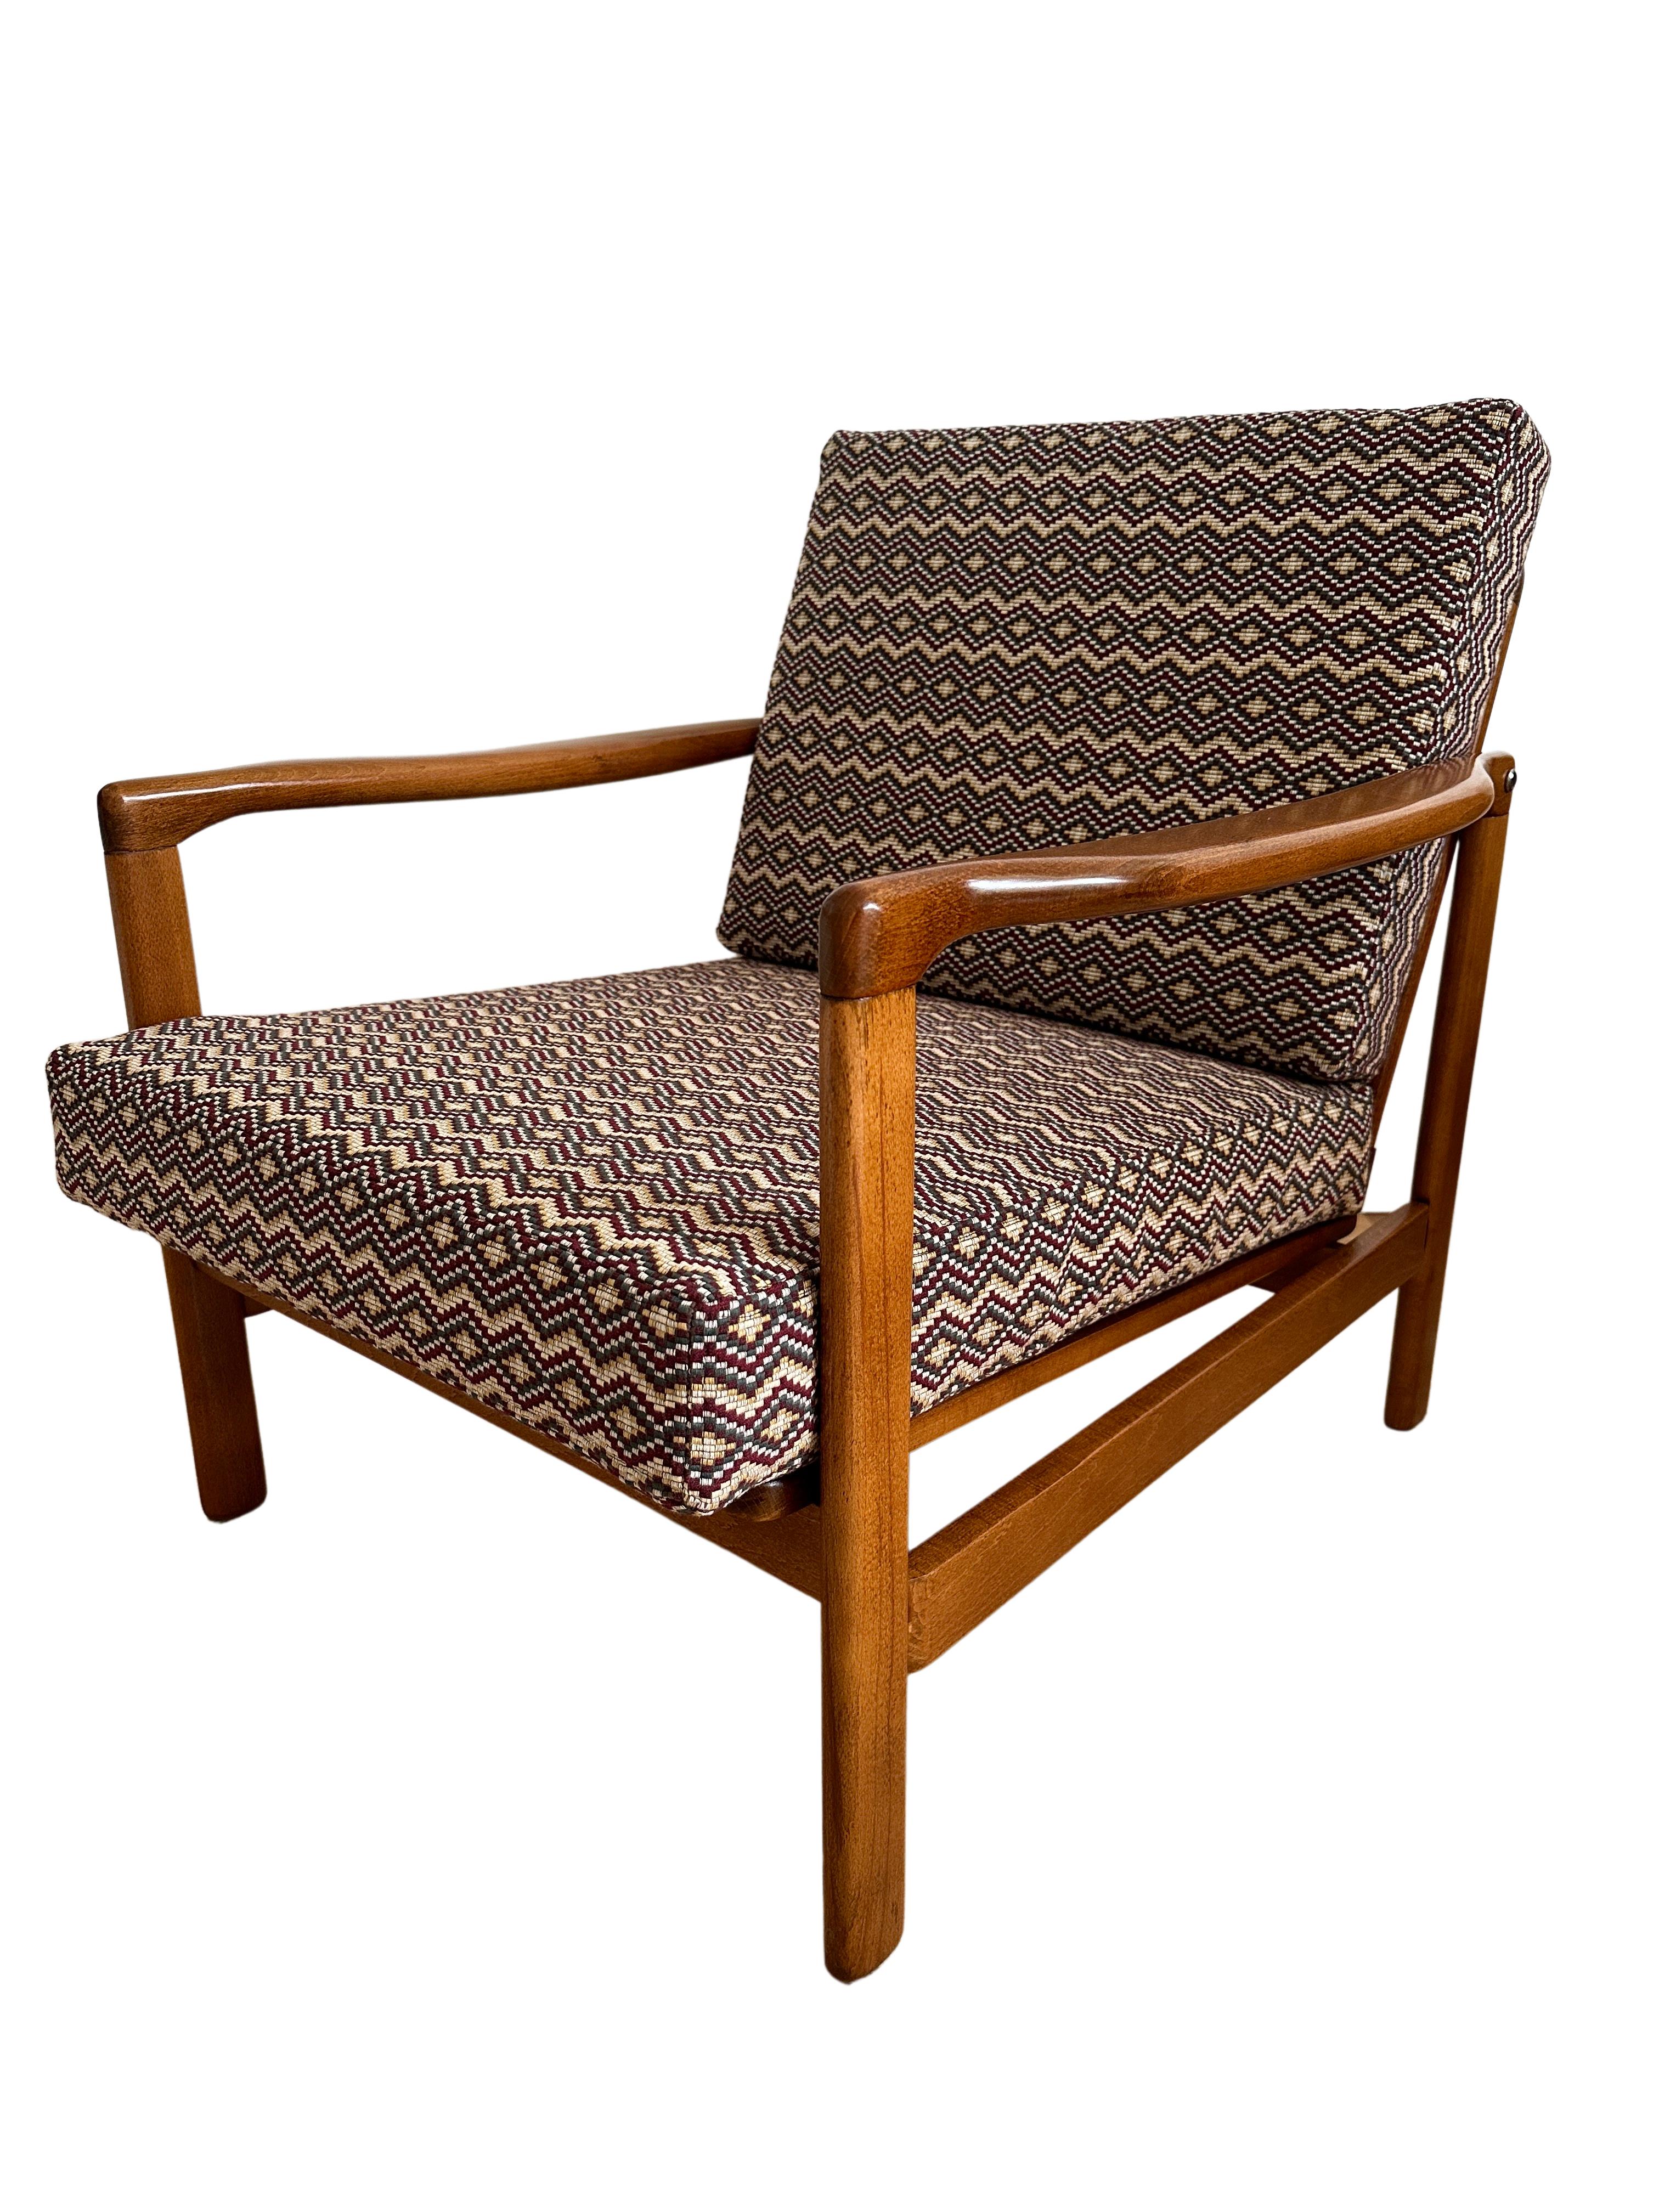 Fabric Set of Two Armchairs, Light Wood, Gaston Y Daniela Upholstery, Europe, 1960s For Sale